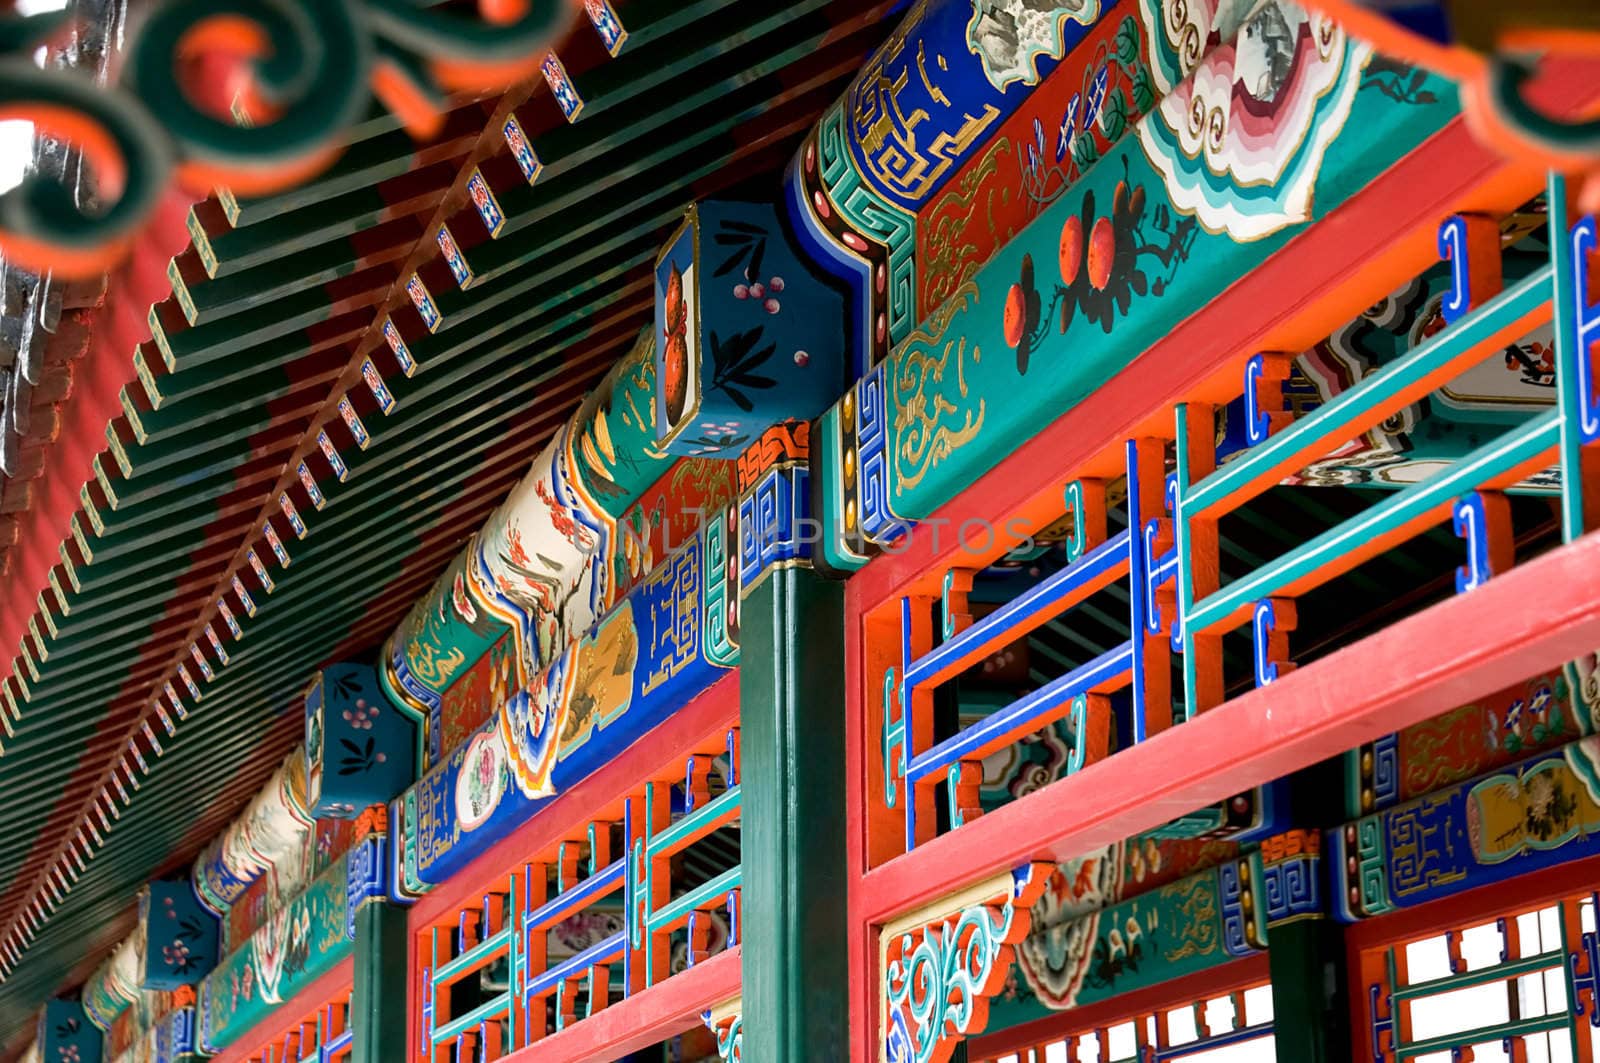 The details of (Chinese) corridor architecture with colorful painting